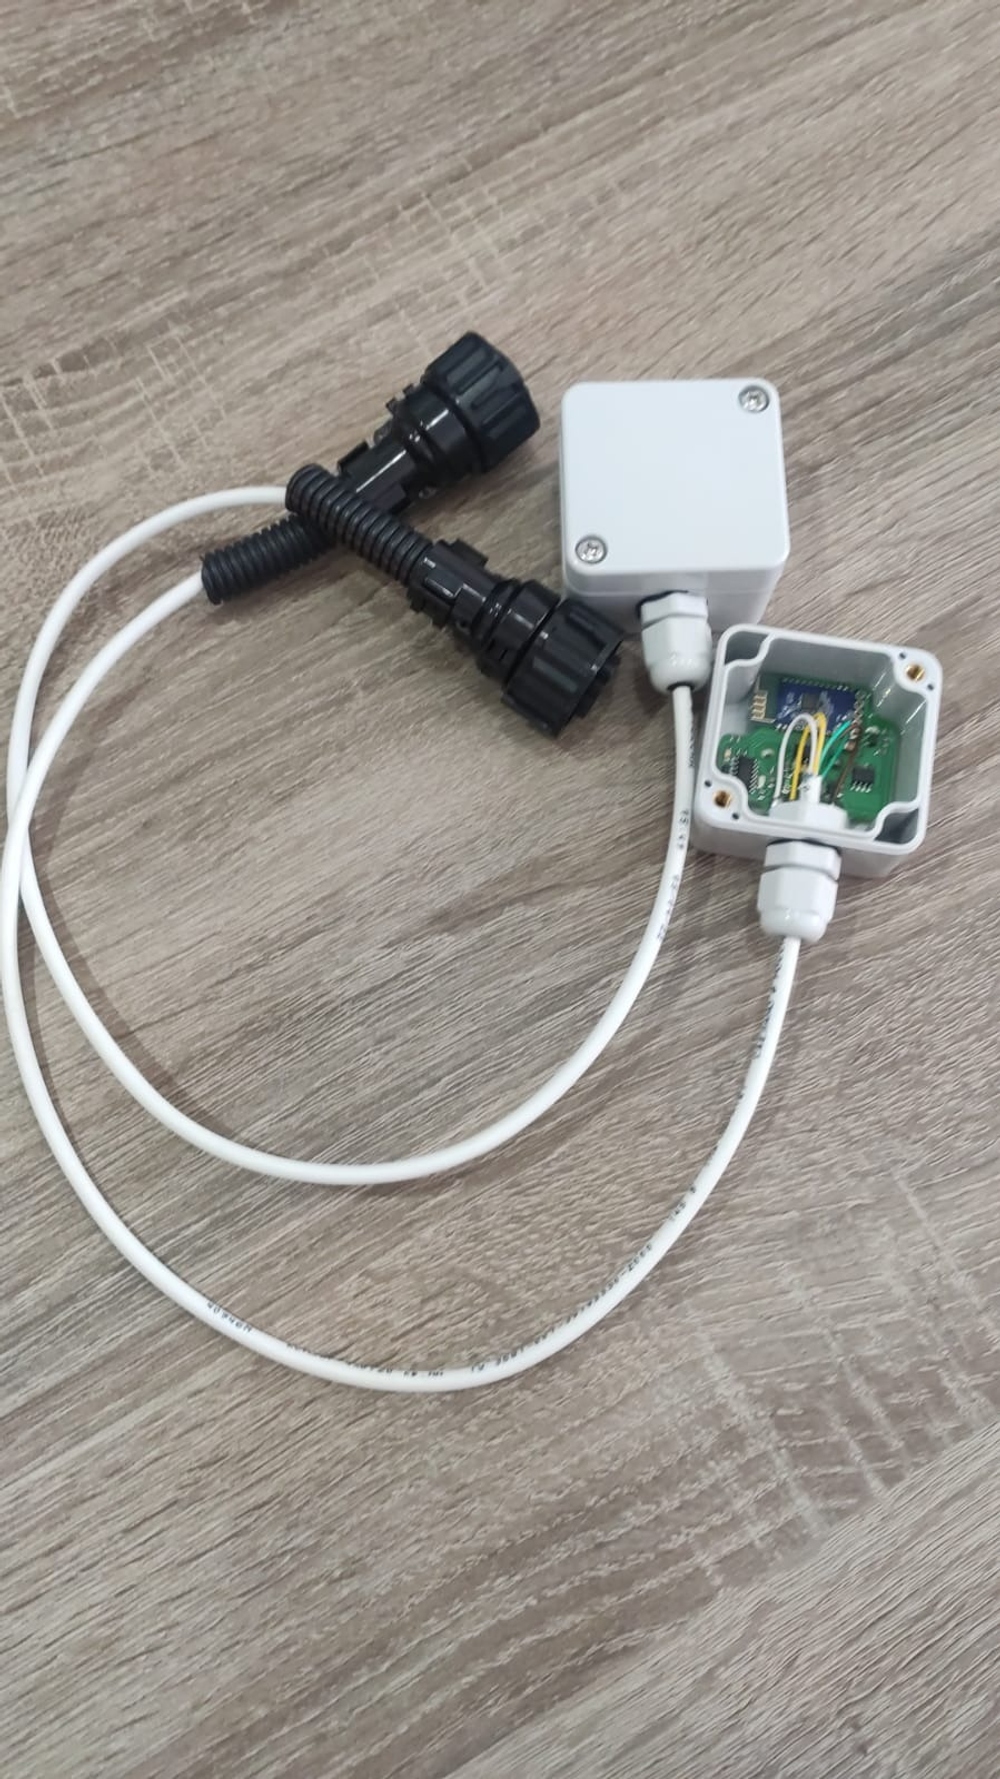 Converter EBC-01 + Android software